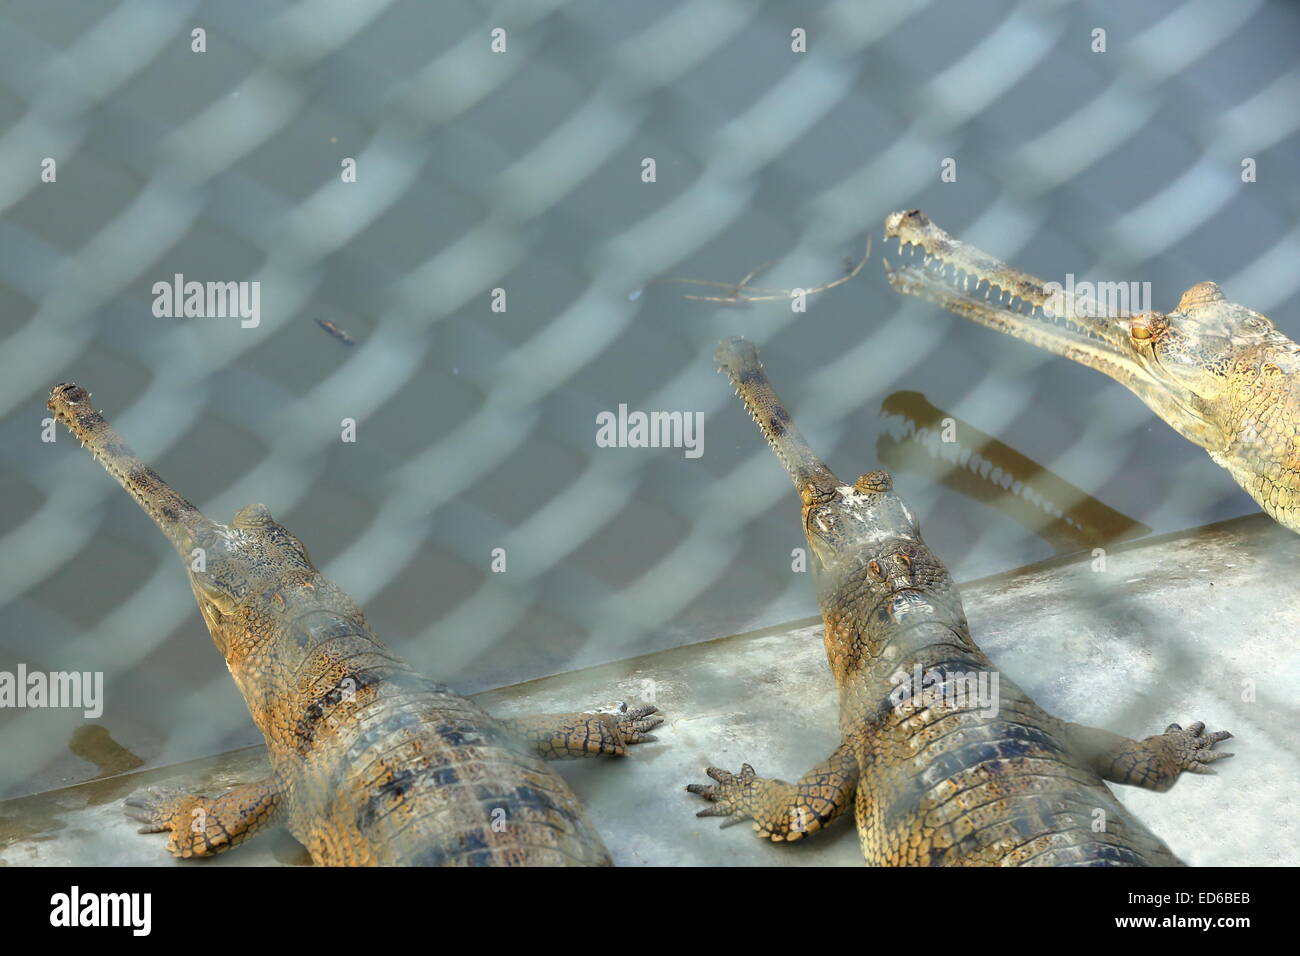 Breeding young gharials -gavialis gangeticus- being reared and raised to an age of 6-9 years under protection of the Gharial CP. Stock Photo